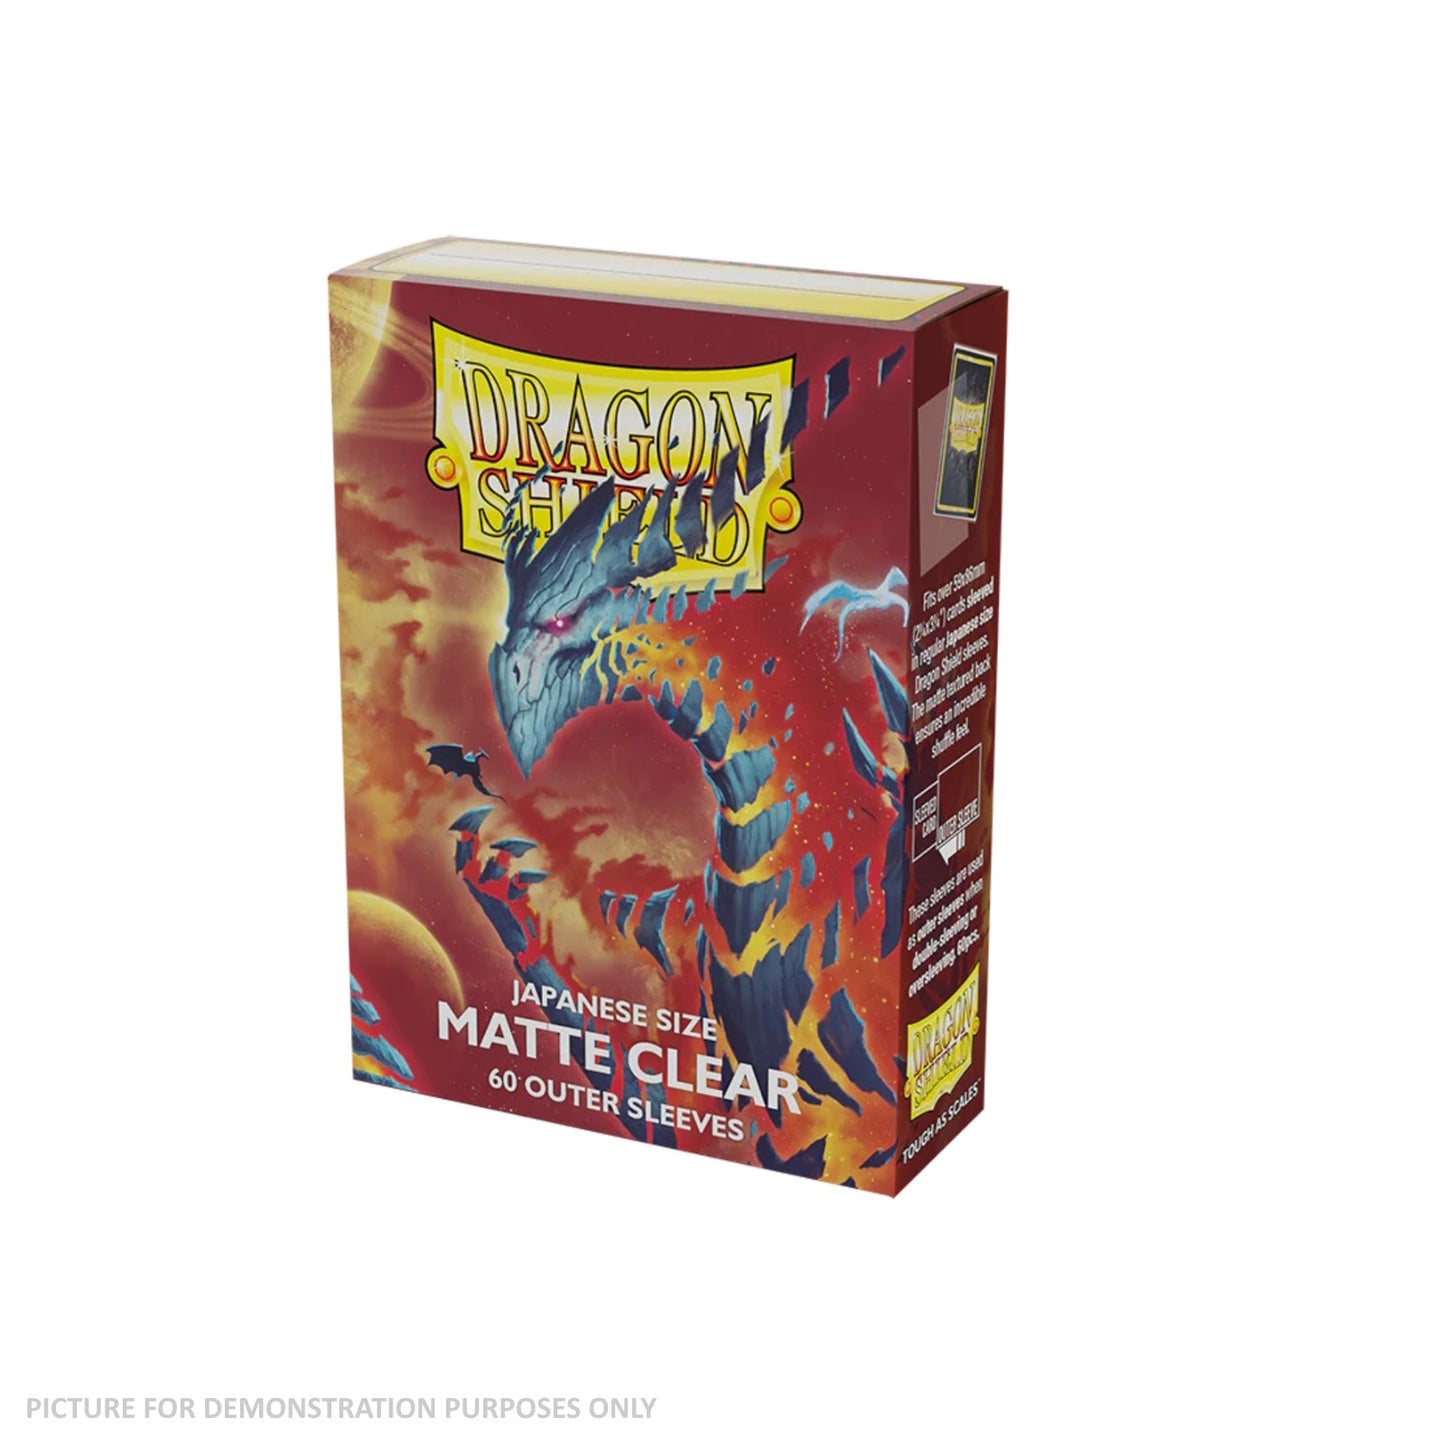 Dragon Shield 60 Japanese Size Card Sleeves - Matte Clear